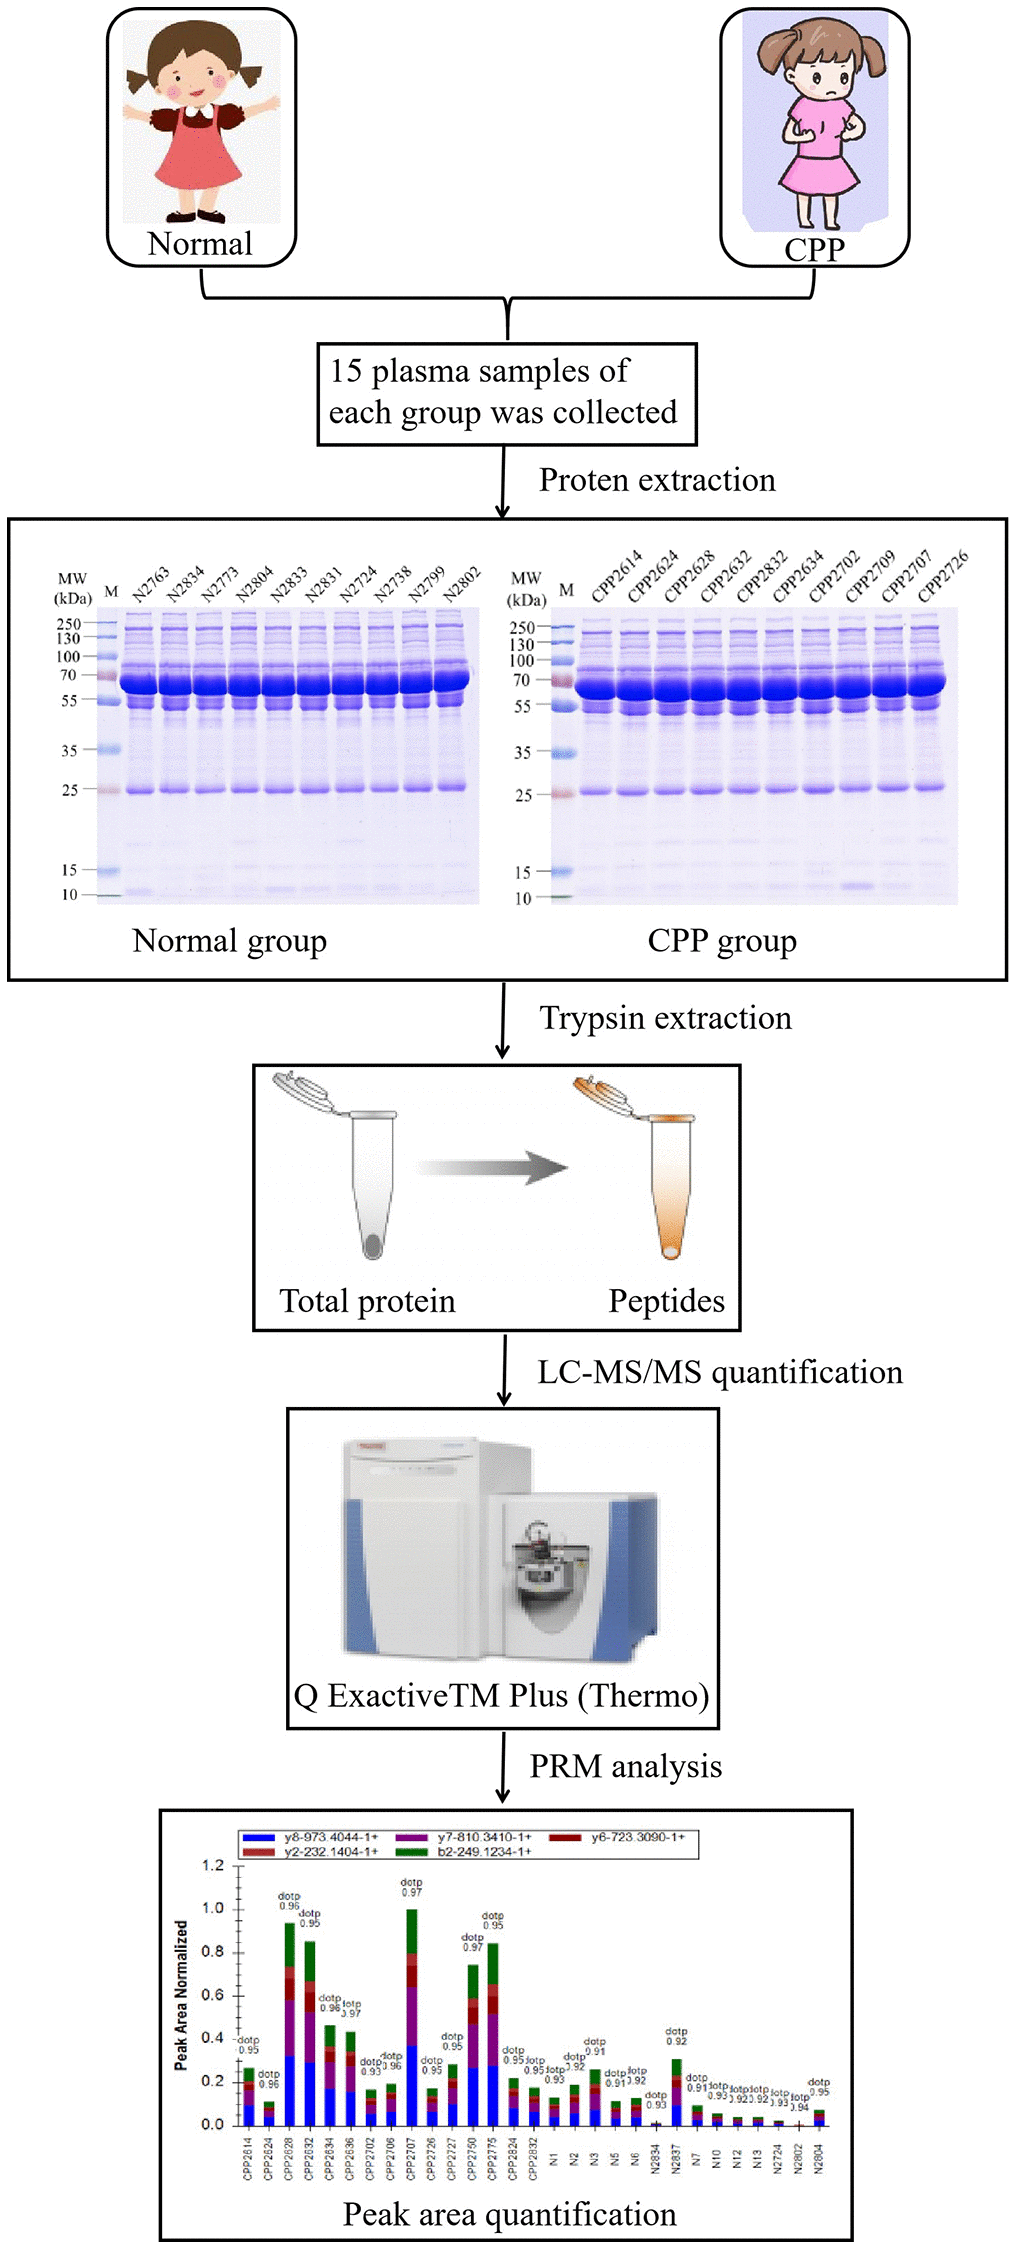 The workflow of proteomic analysis between normal and CPP group.